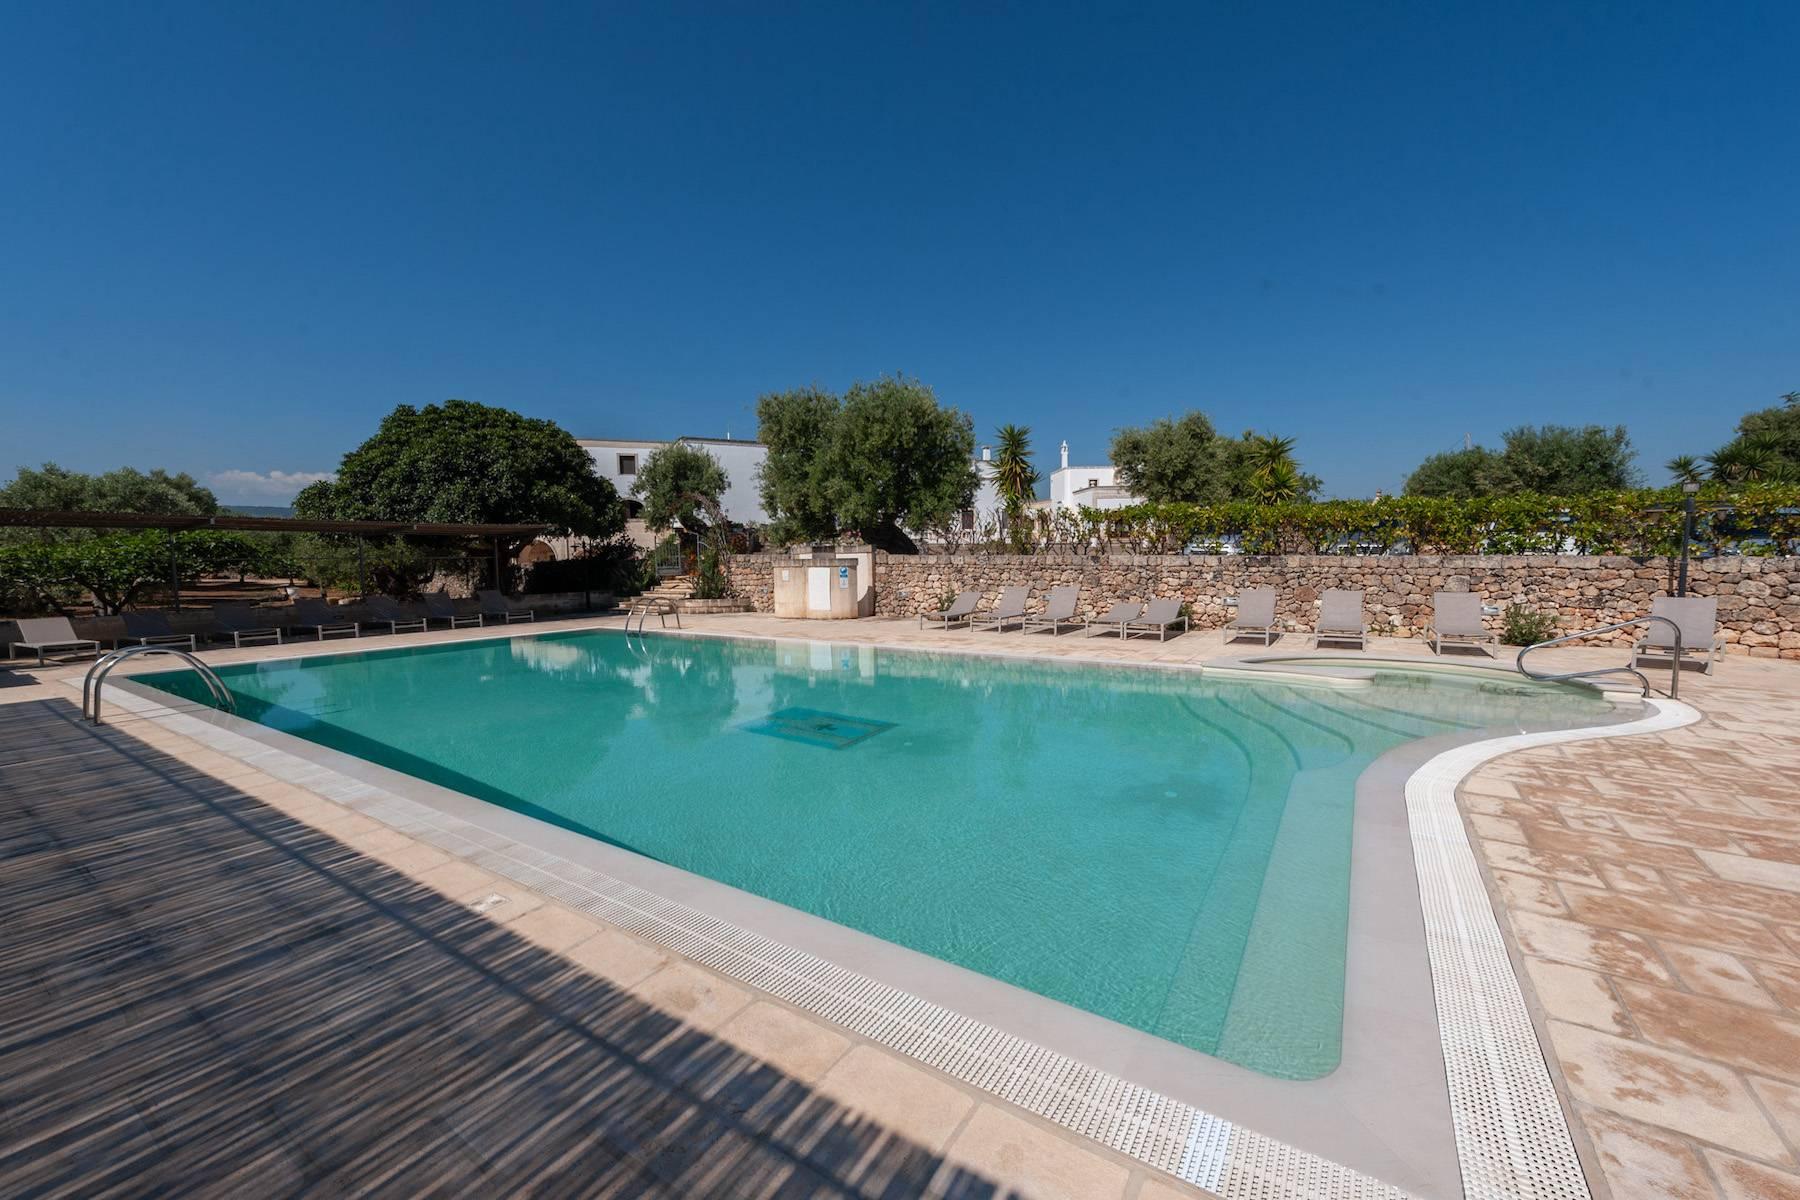 Charming 18th century Masseria surrounded by centuries-old olive trees - 10